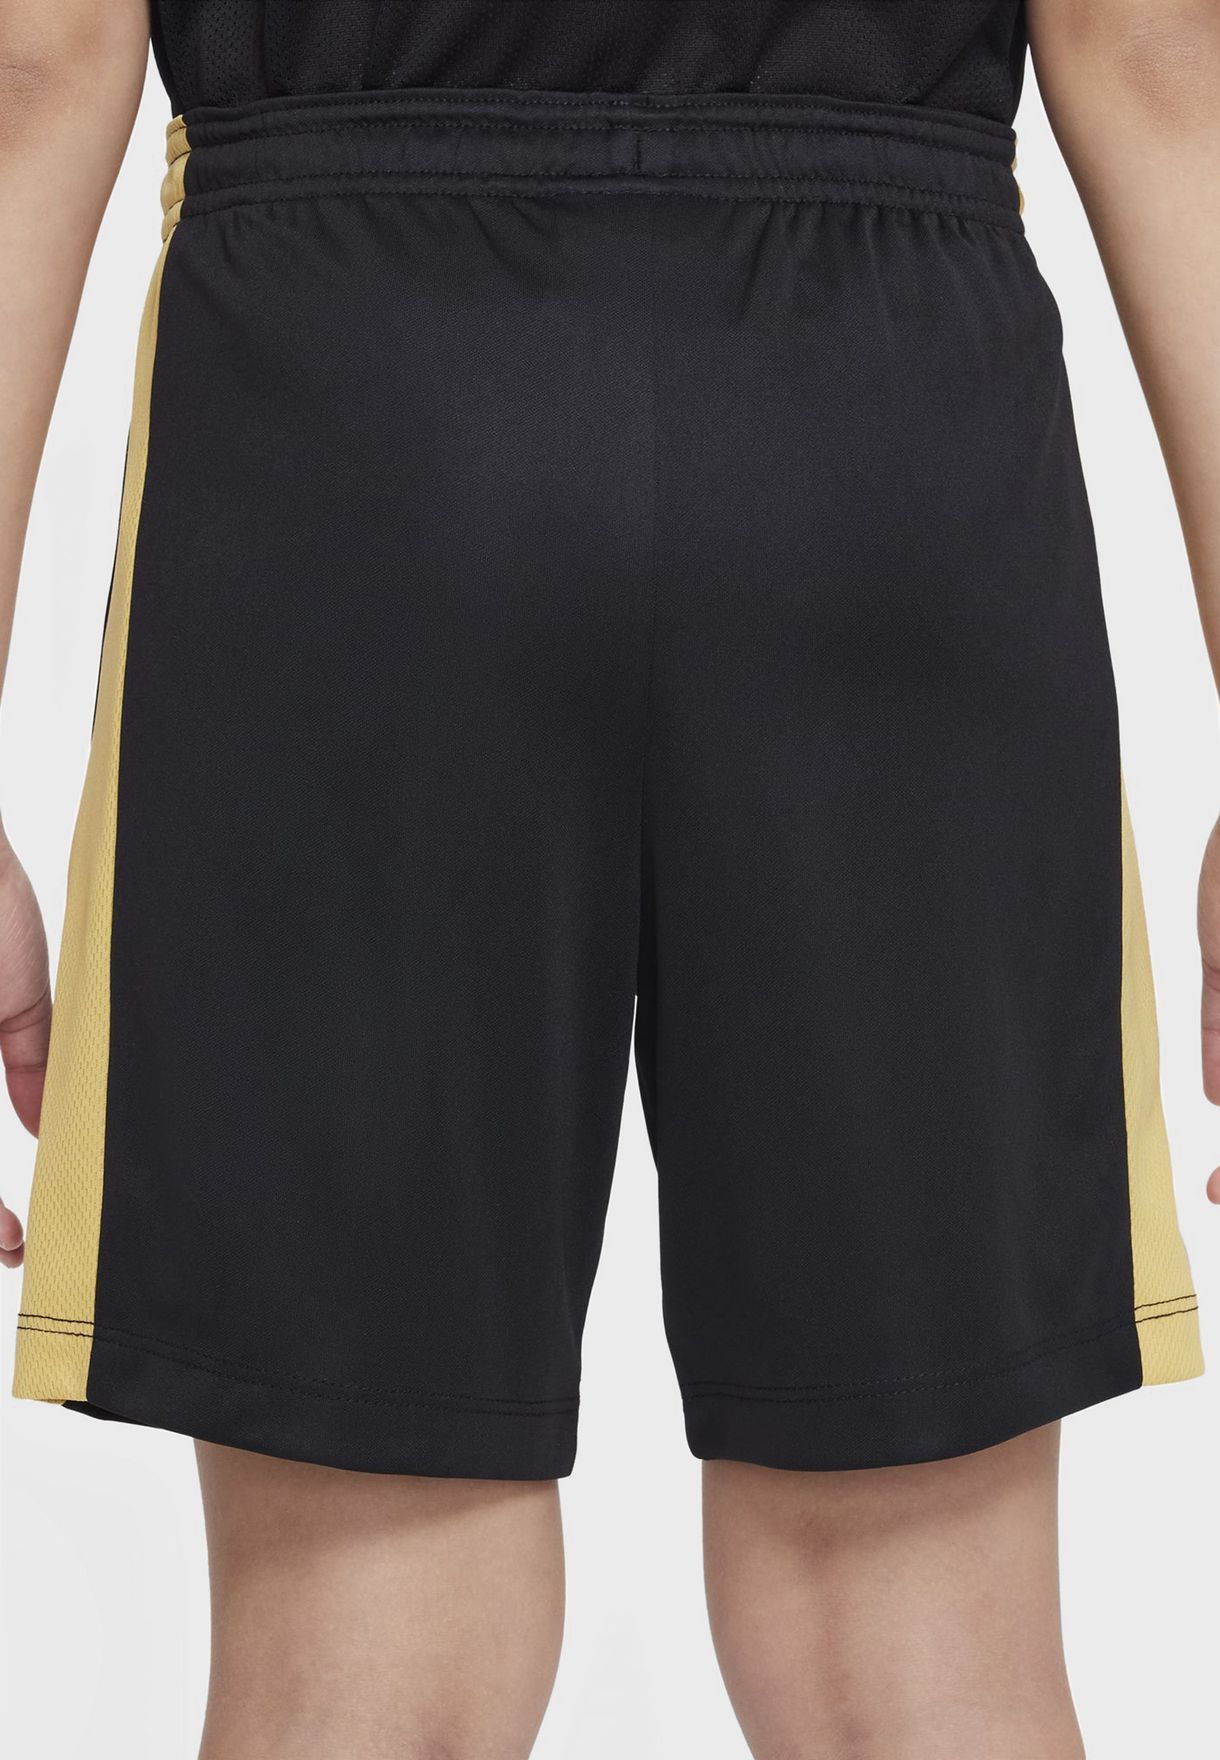 Youth Dri-Fit Academy23 Shorts